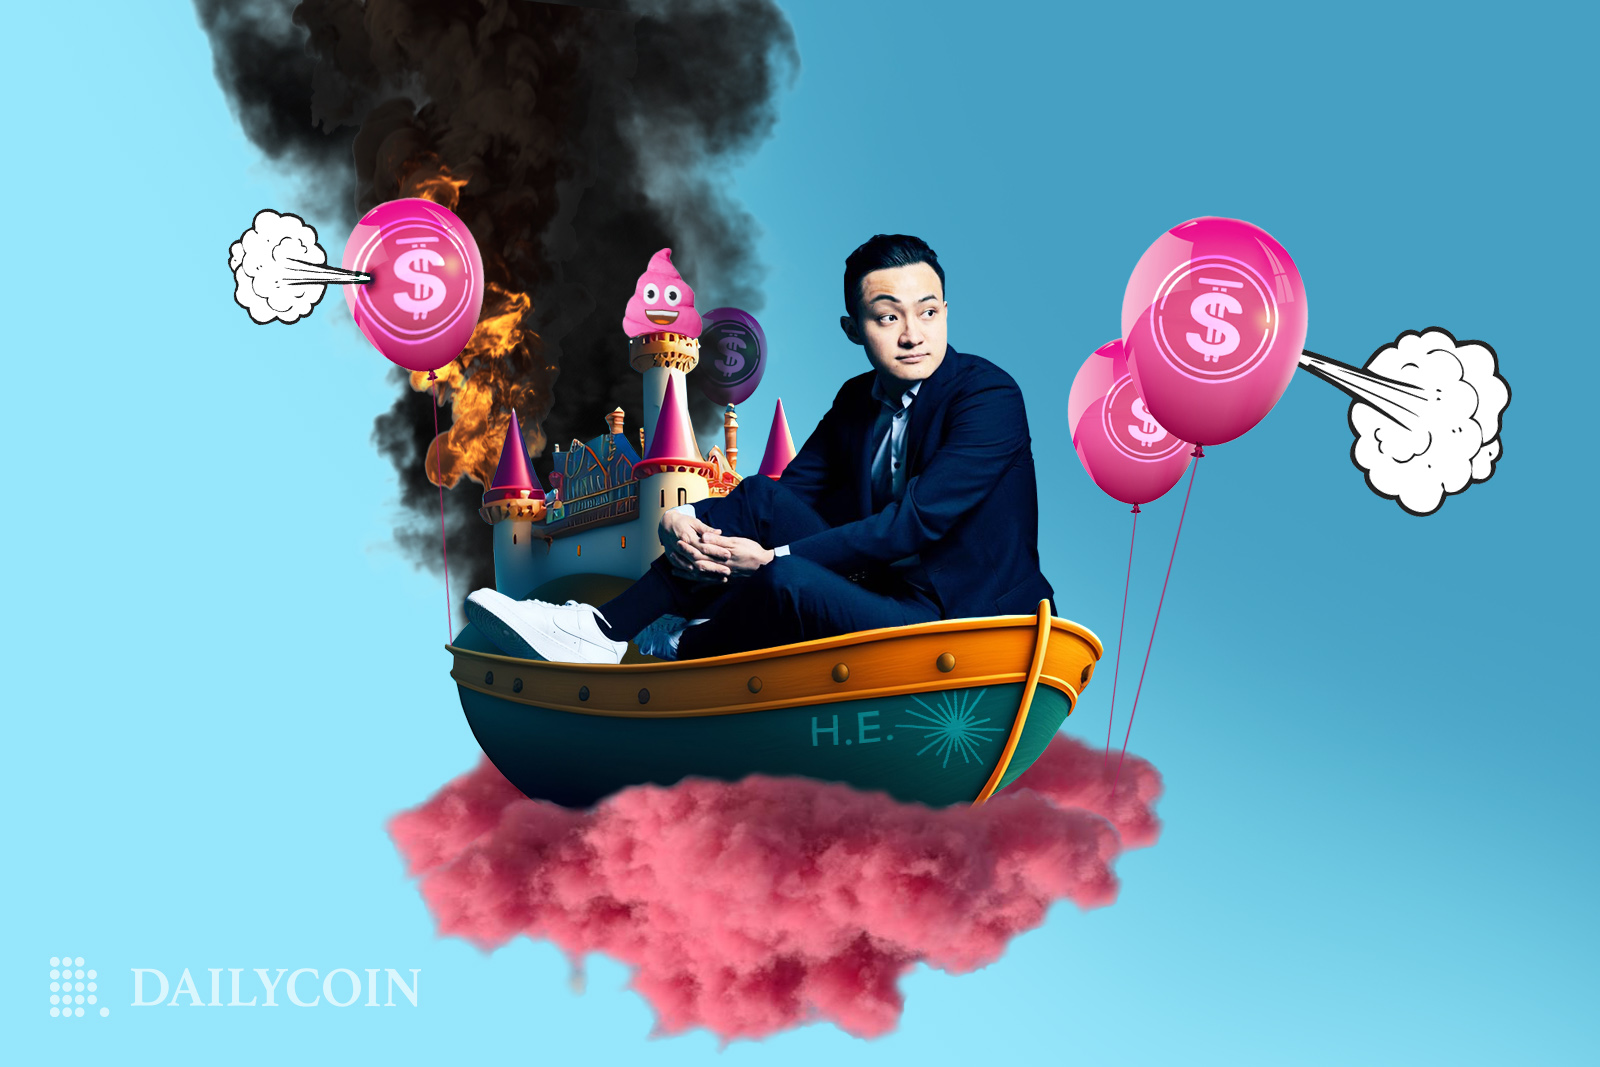 Justin Sun on a boat in the sky, riding on a pink cloud, propped up by deflating pink balloons with dollar signs, as a castle in the sky burns behind him.